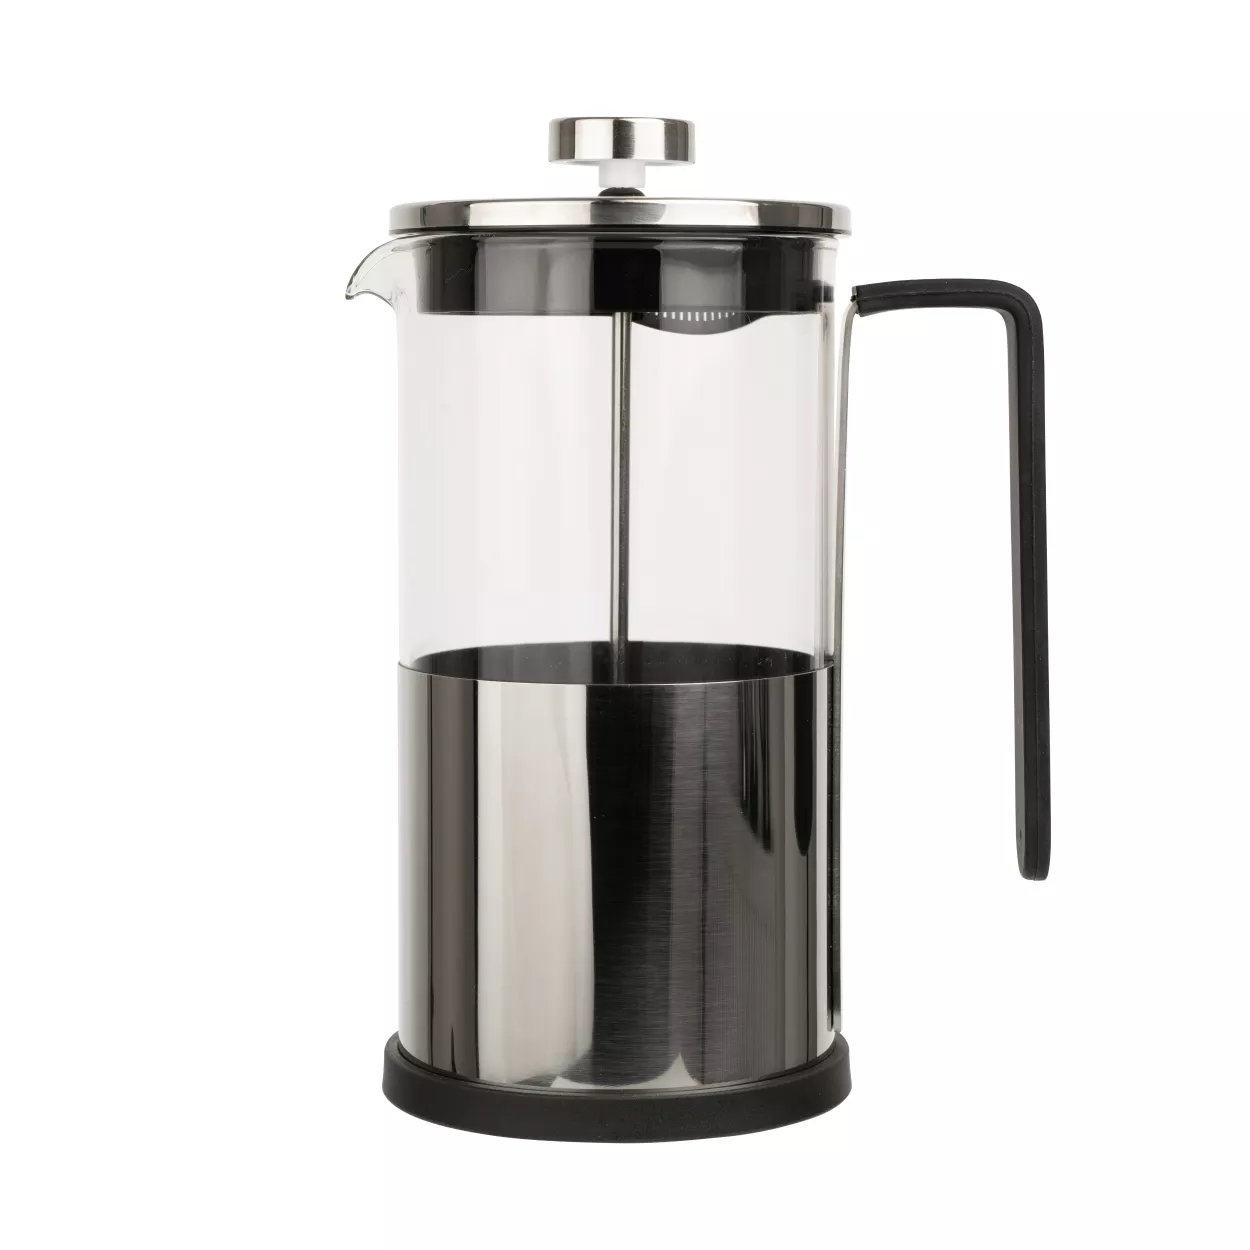 Infuso 8 Cup Glass Cafetiere